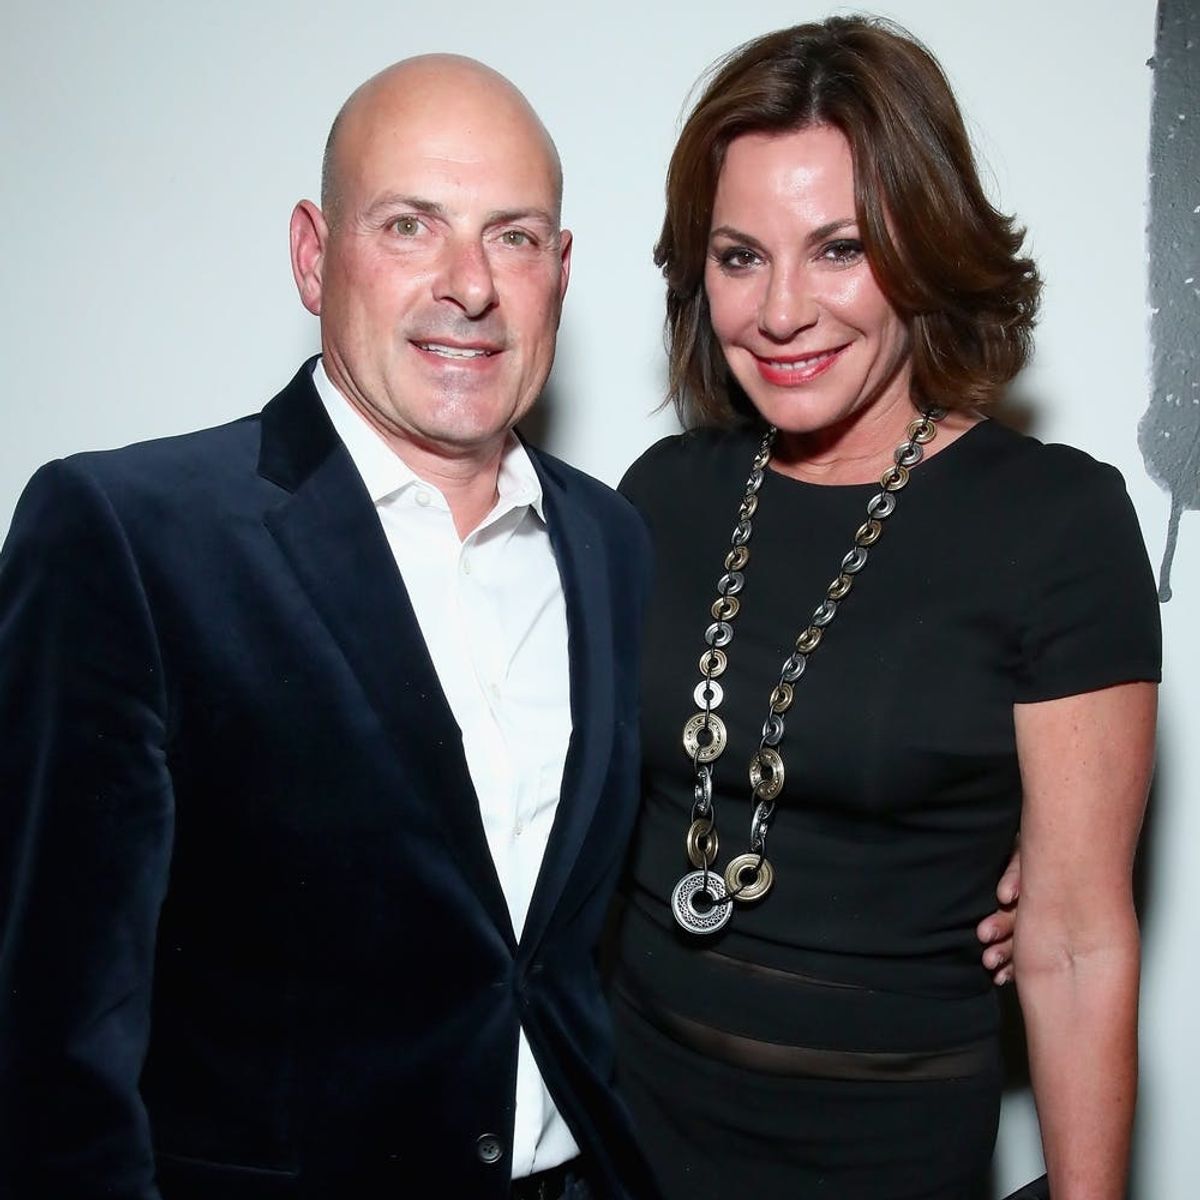 RHONY’s Luann de Lesseps Reveals the “Final Straw” That Led to Her Divorce from Tom D’Agostino